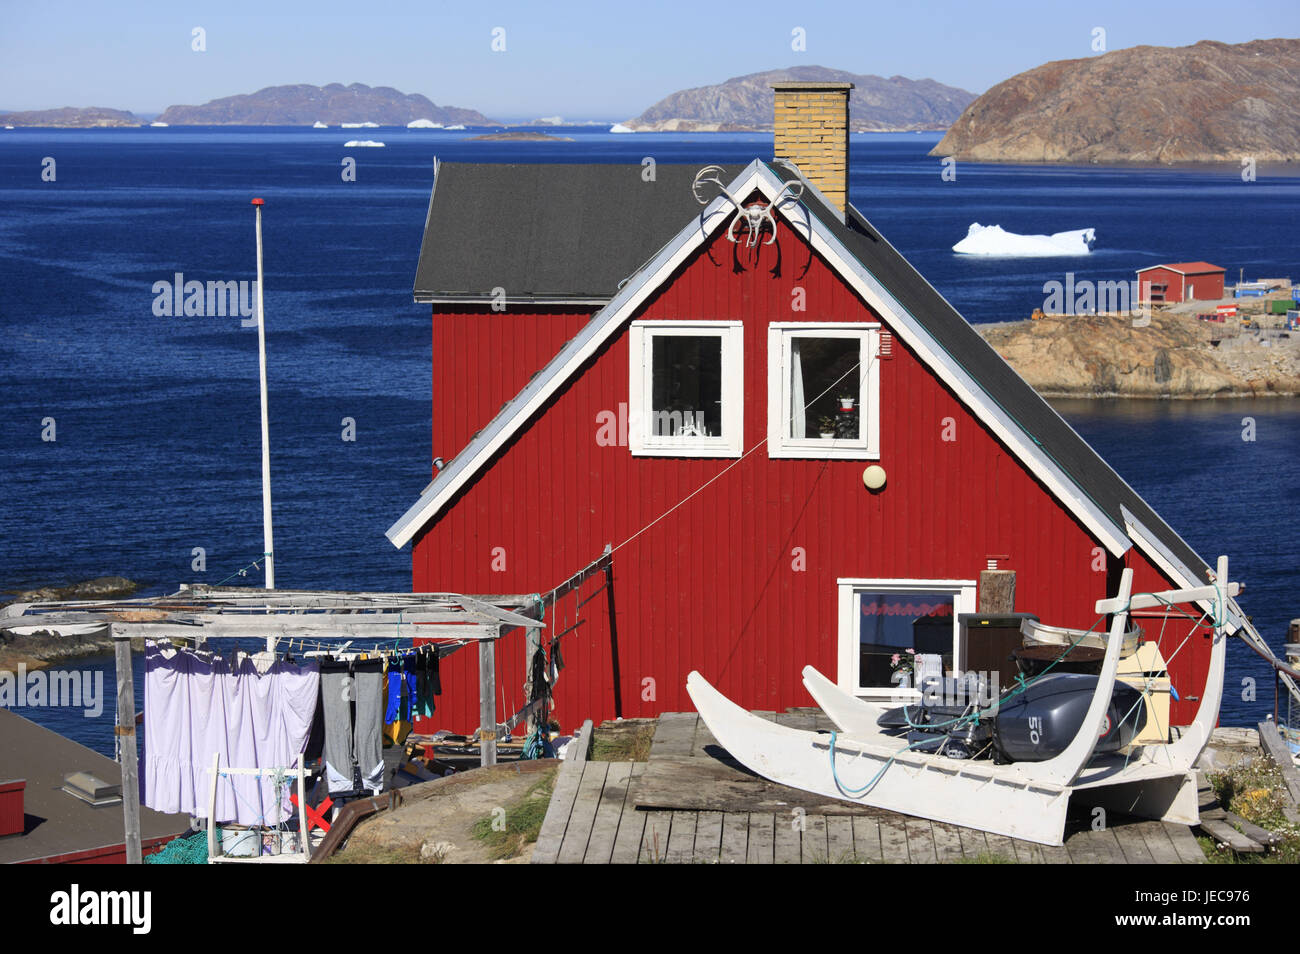 Greenland, Upernavik, wooden house, slide, clothes horse, background, sea, iceberg, North-Western Greenland, town, residential house, house, timber-frame construction way, red, typically for country, outside, deserted, the Arctic, water, view, rock, coast, coastal scenery, Stock Photo